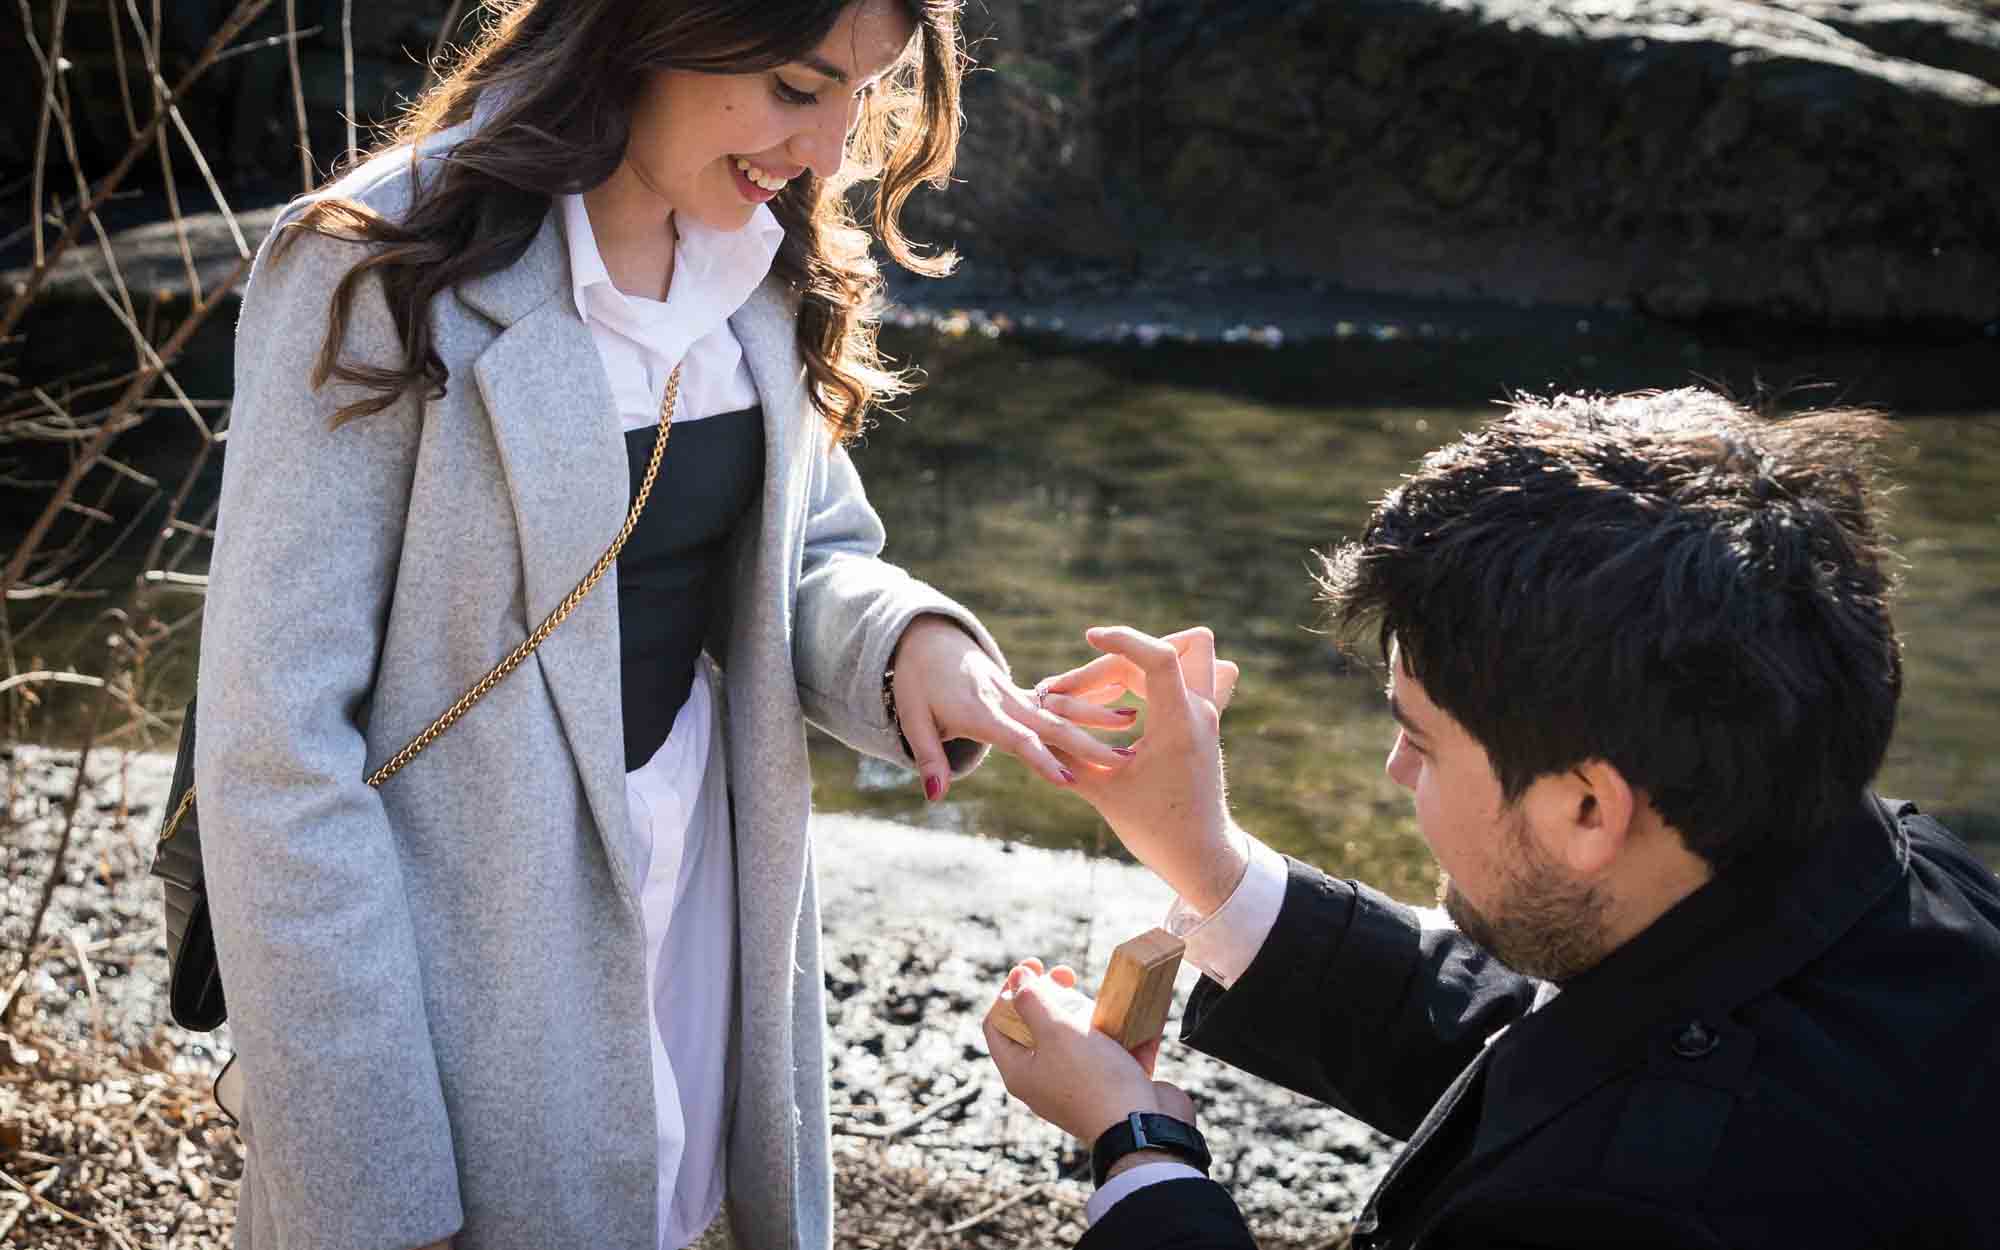 Man putting engagement ring on woman's finger during a Gapstow Bridge surprise proposal in Central Park